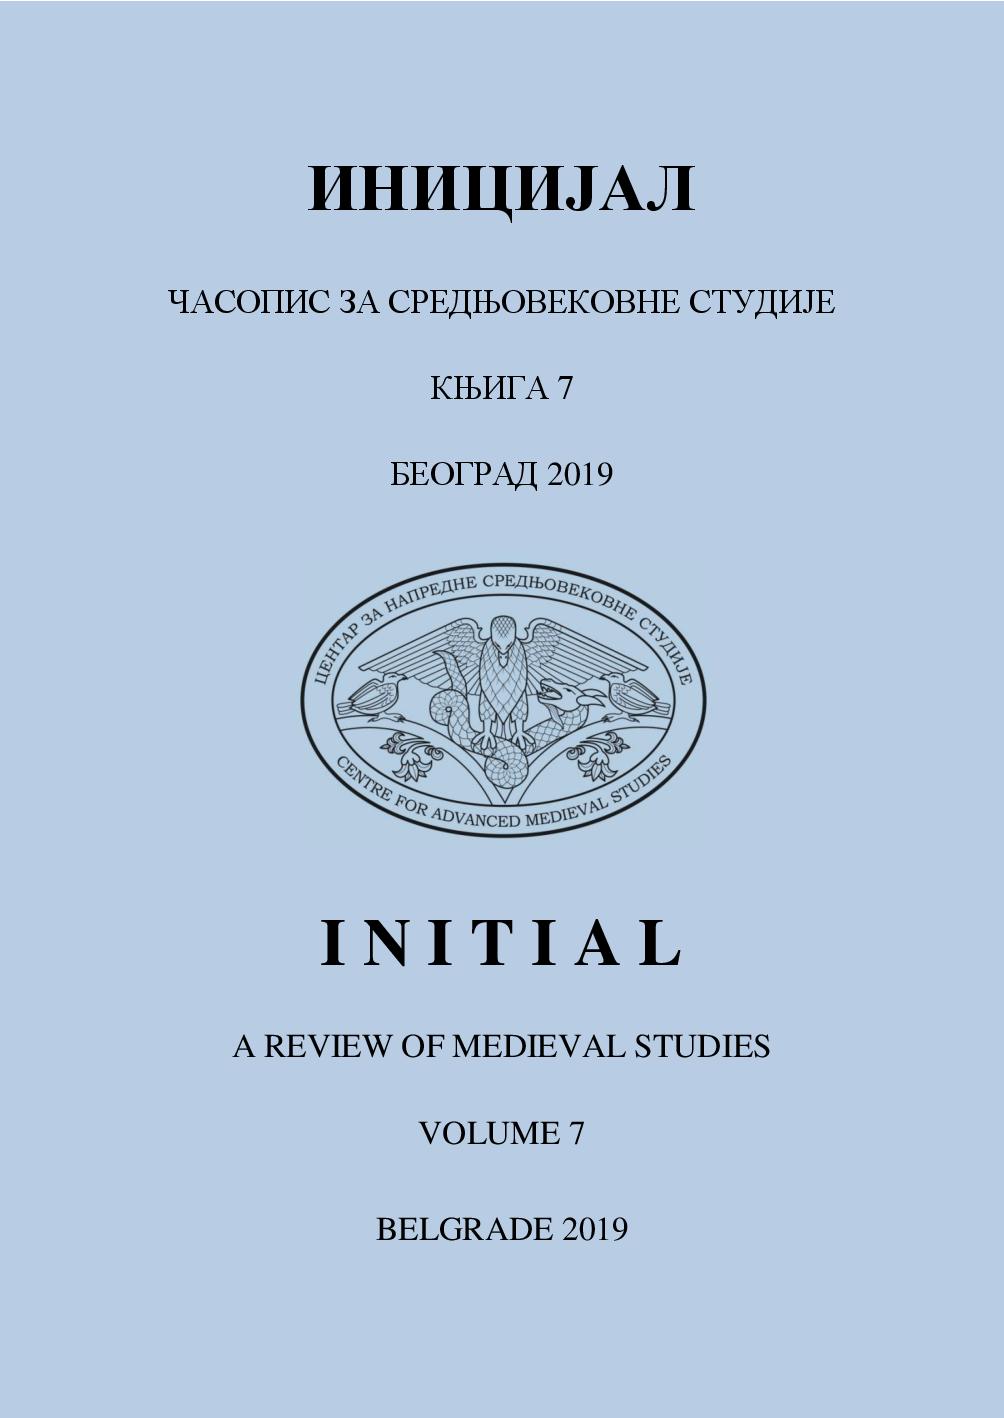 ON THE ROLE OF THE CLERGY IN THE COMPOSITION OF SERBIAN MEDIEVAL ROYAL CHARTERS